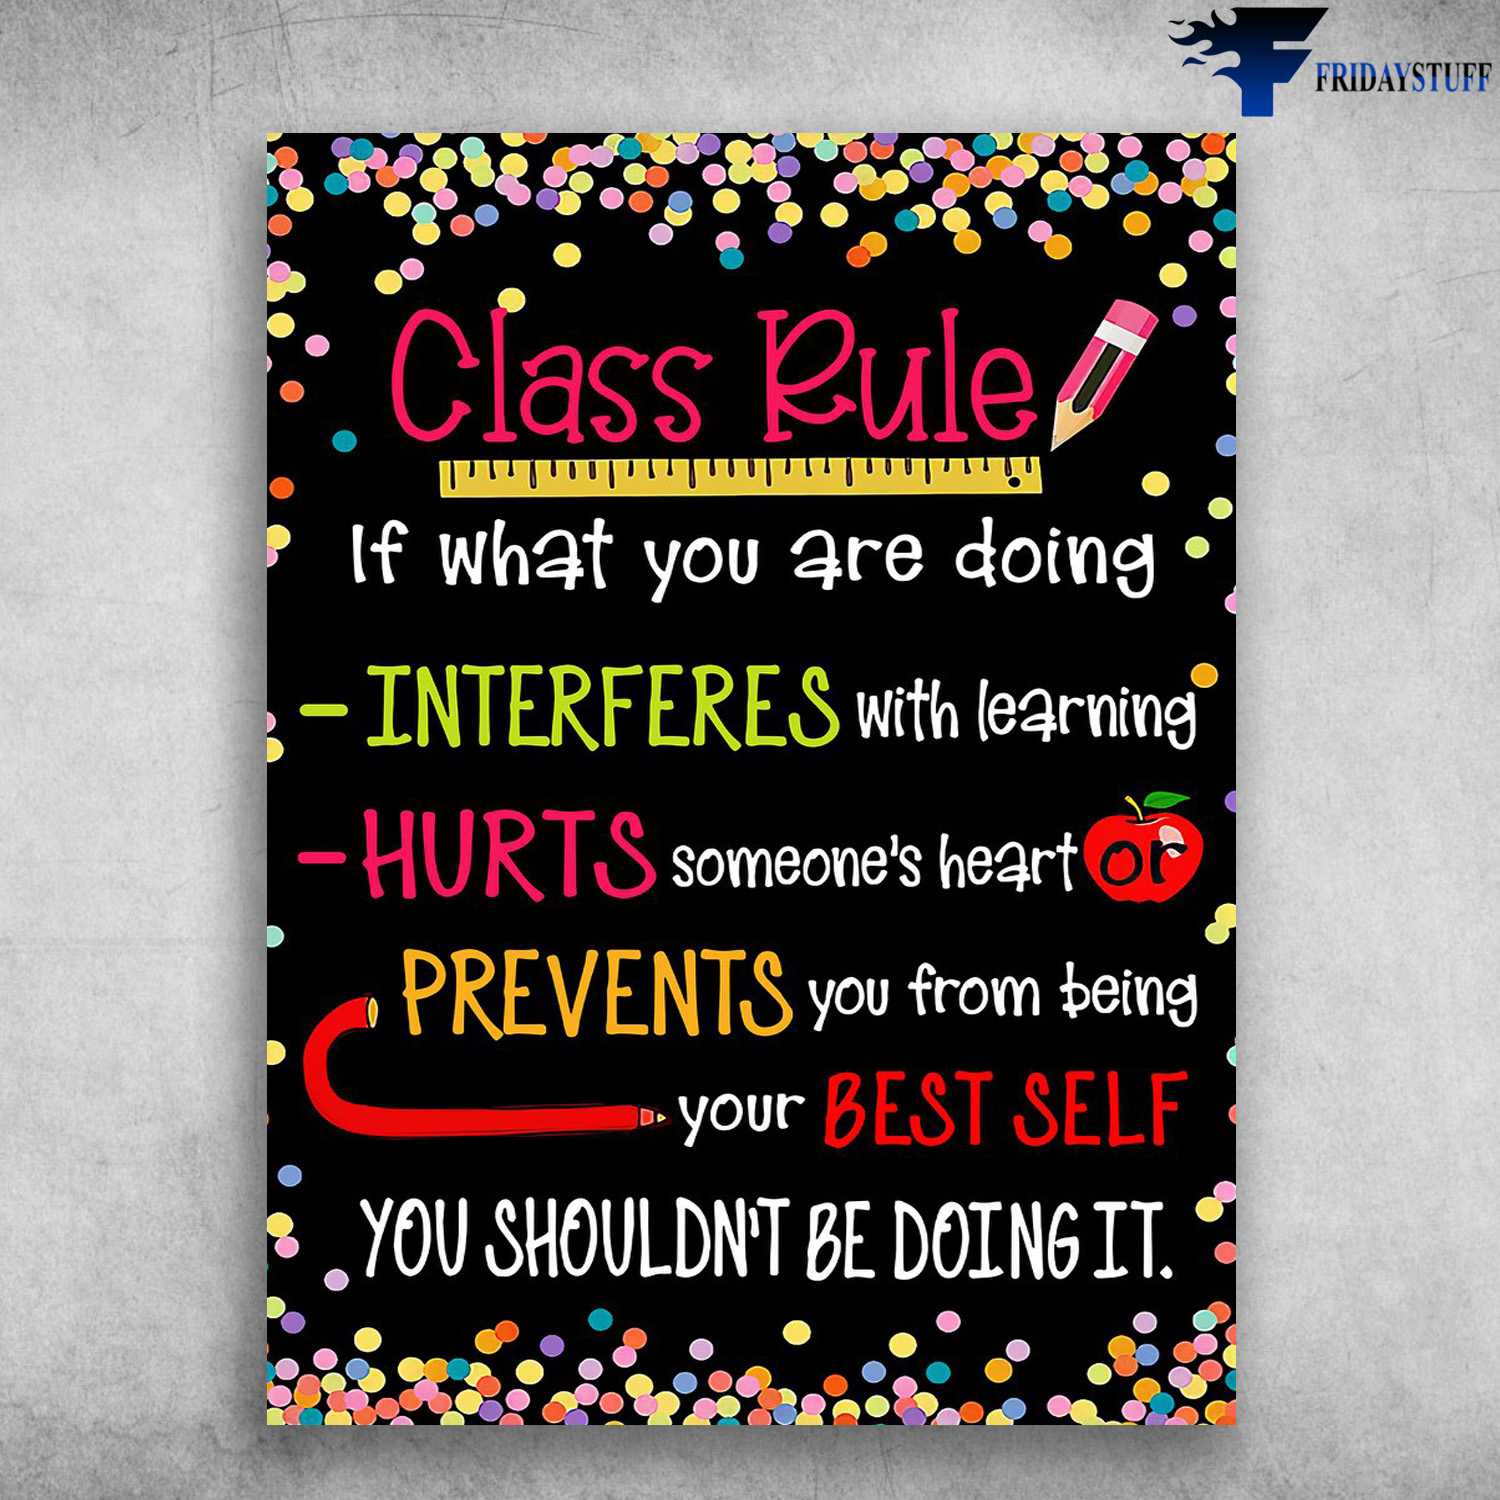 Class Rule, Classroom Poster - If What You Are Doing, Interferes With Learning, Hurts Someone's Heart, Or Prevents You From Being, Your Best Self